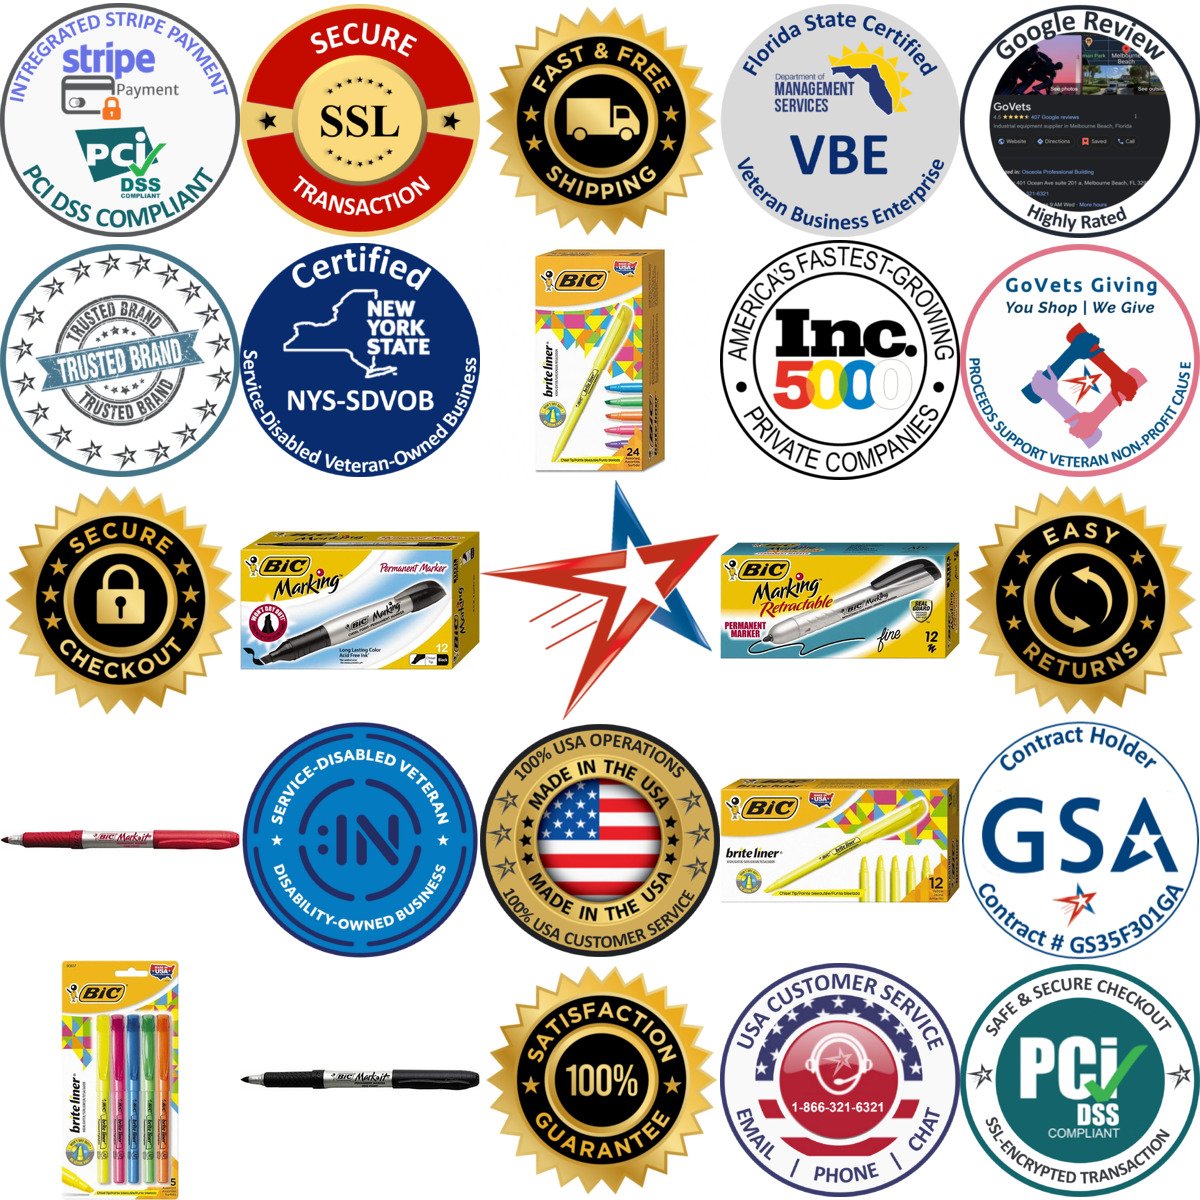 A selection of Bic products on GoVets